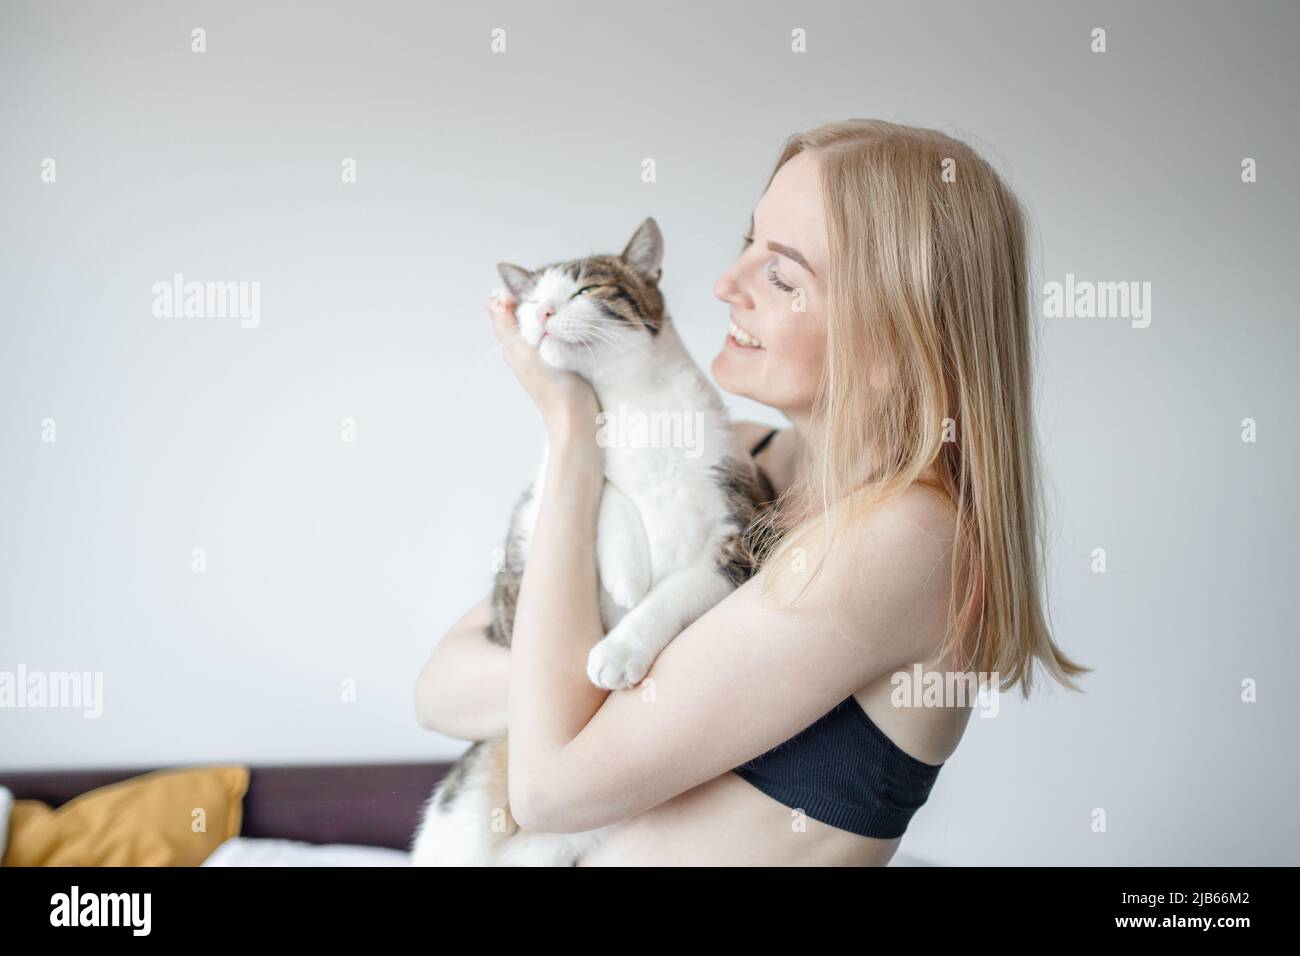 Blond girl sitting and holding a young cat available as Framed